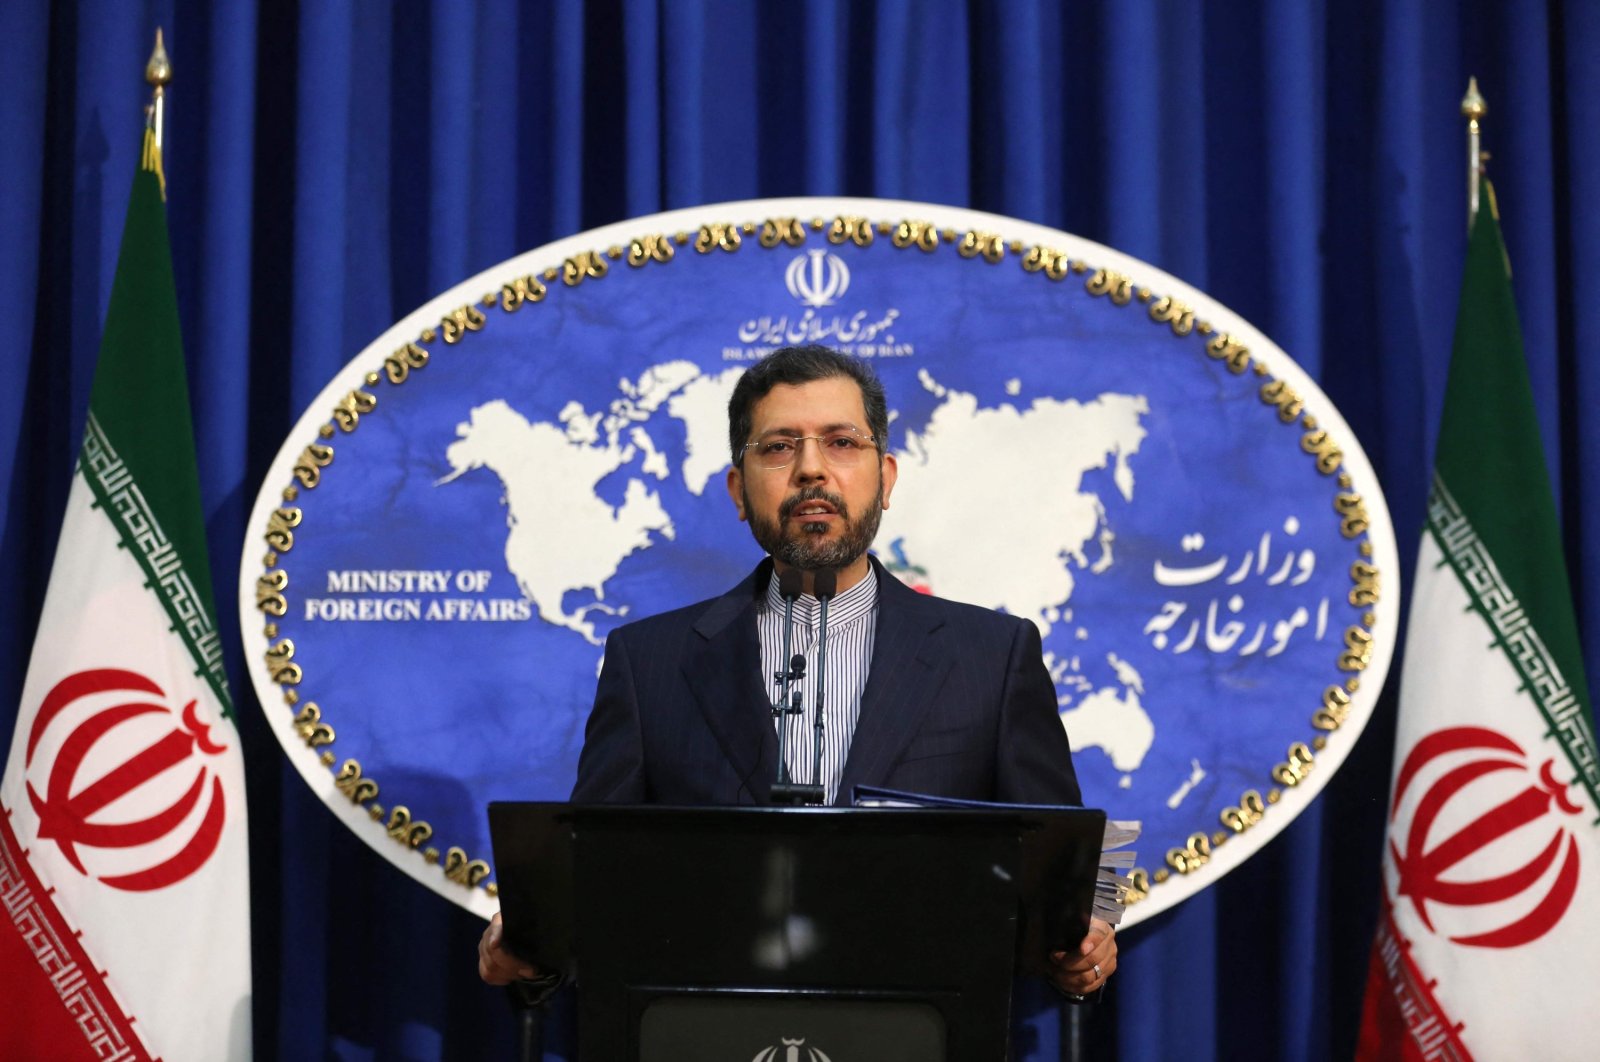 Iranian foreign ministry spokesman Saied Khatibzadeh speaks during a press conference in Tehran on Feb. 22, 2021. (AFP File Photo)